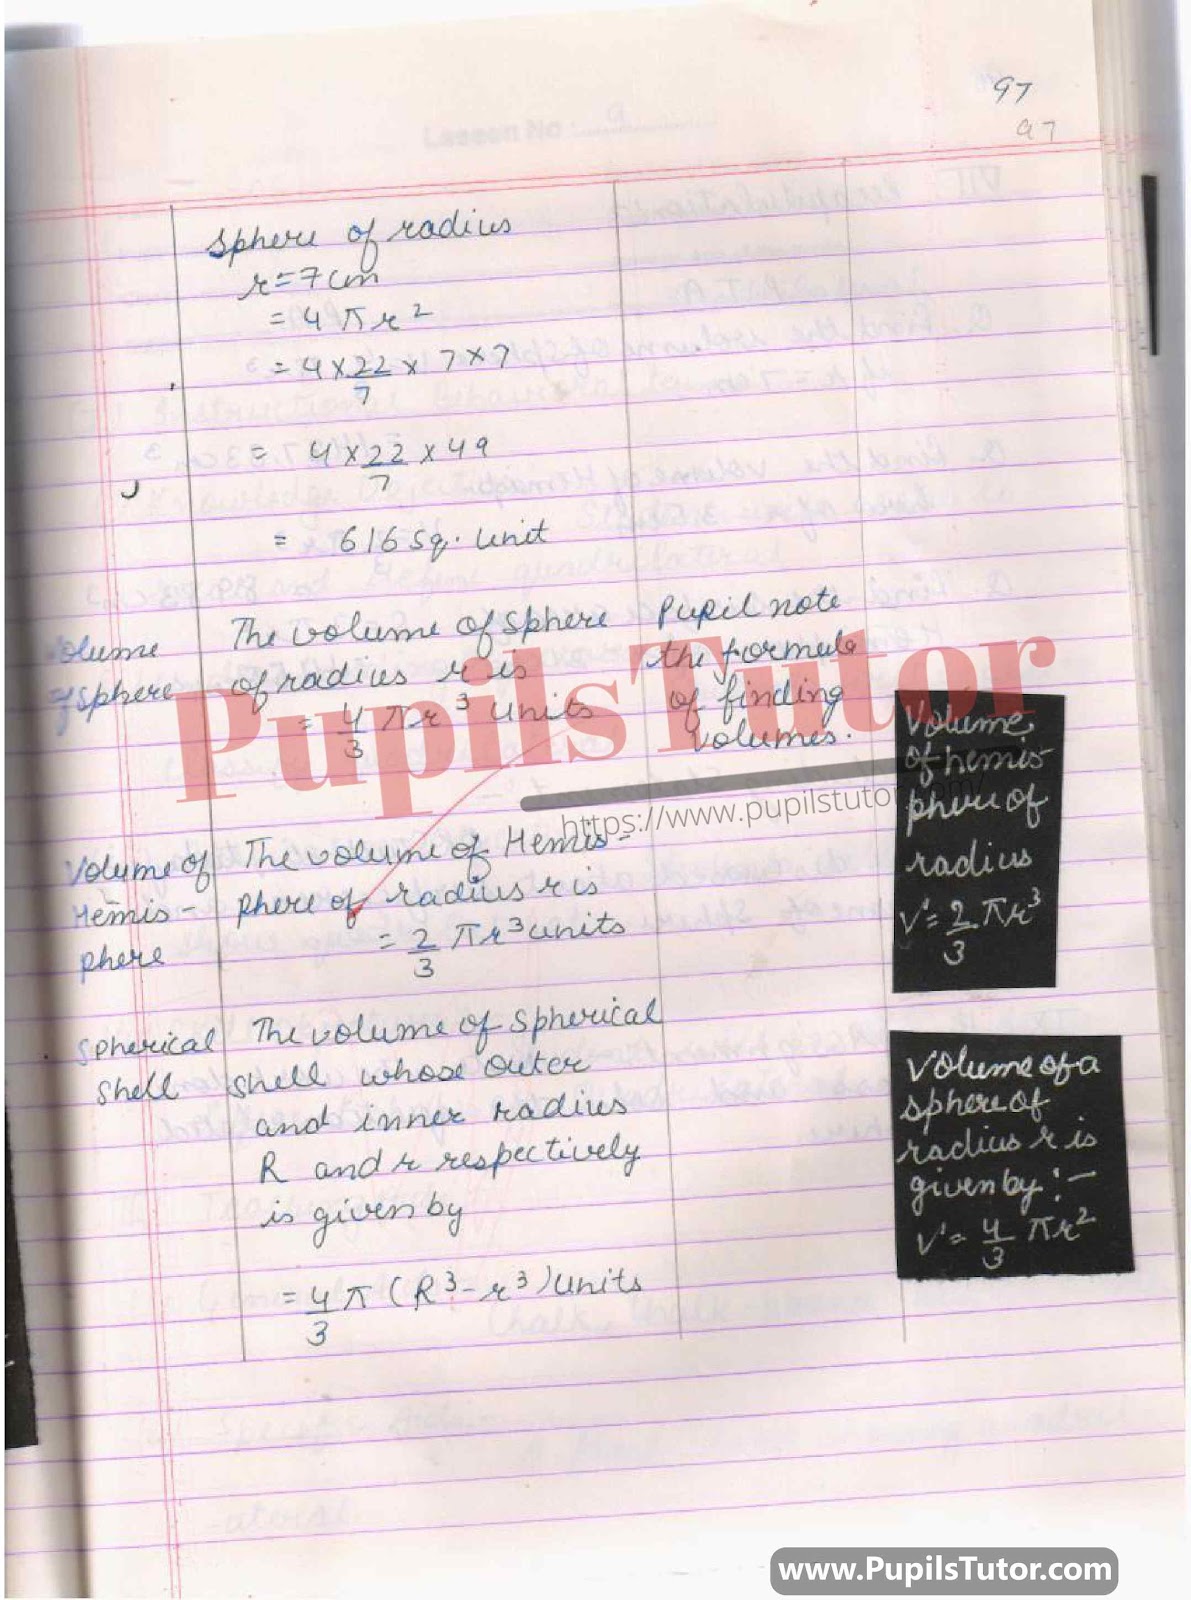 Lesson Plan On Surface Area And Volume Of Sphere For Class 9, 10th.  – [Page And Pic Number 5] – https://www.pupilstutor.com/